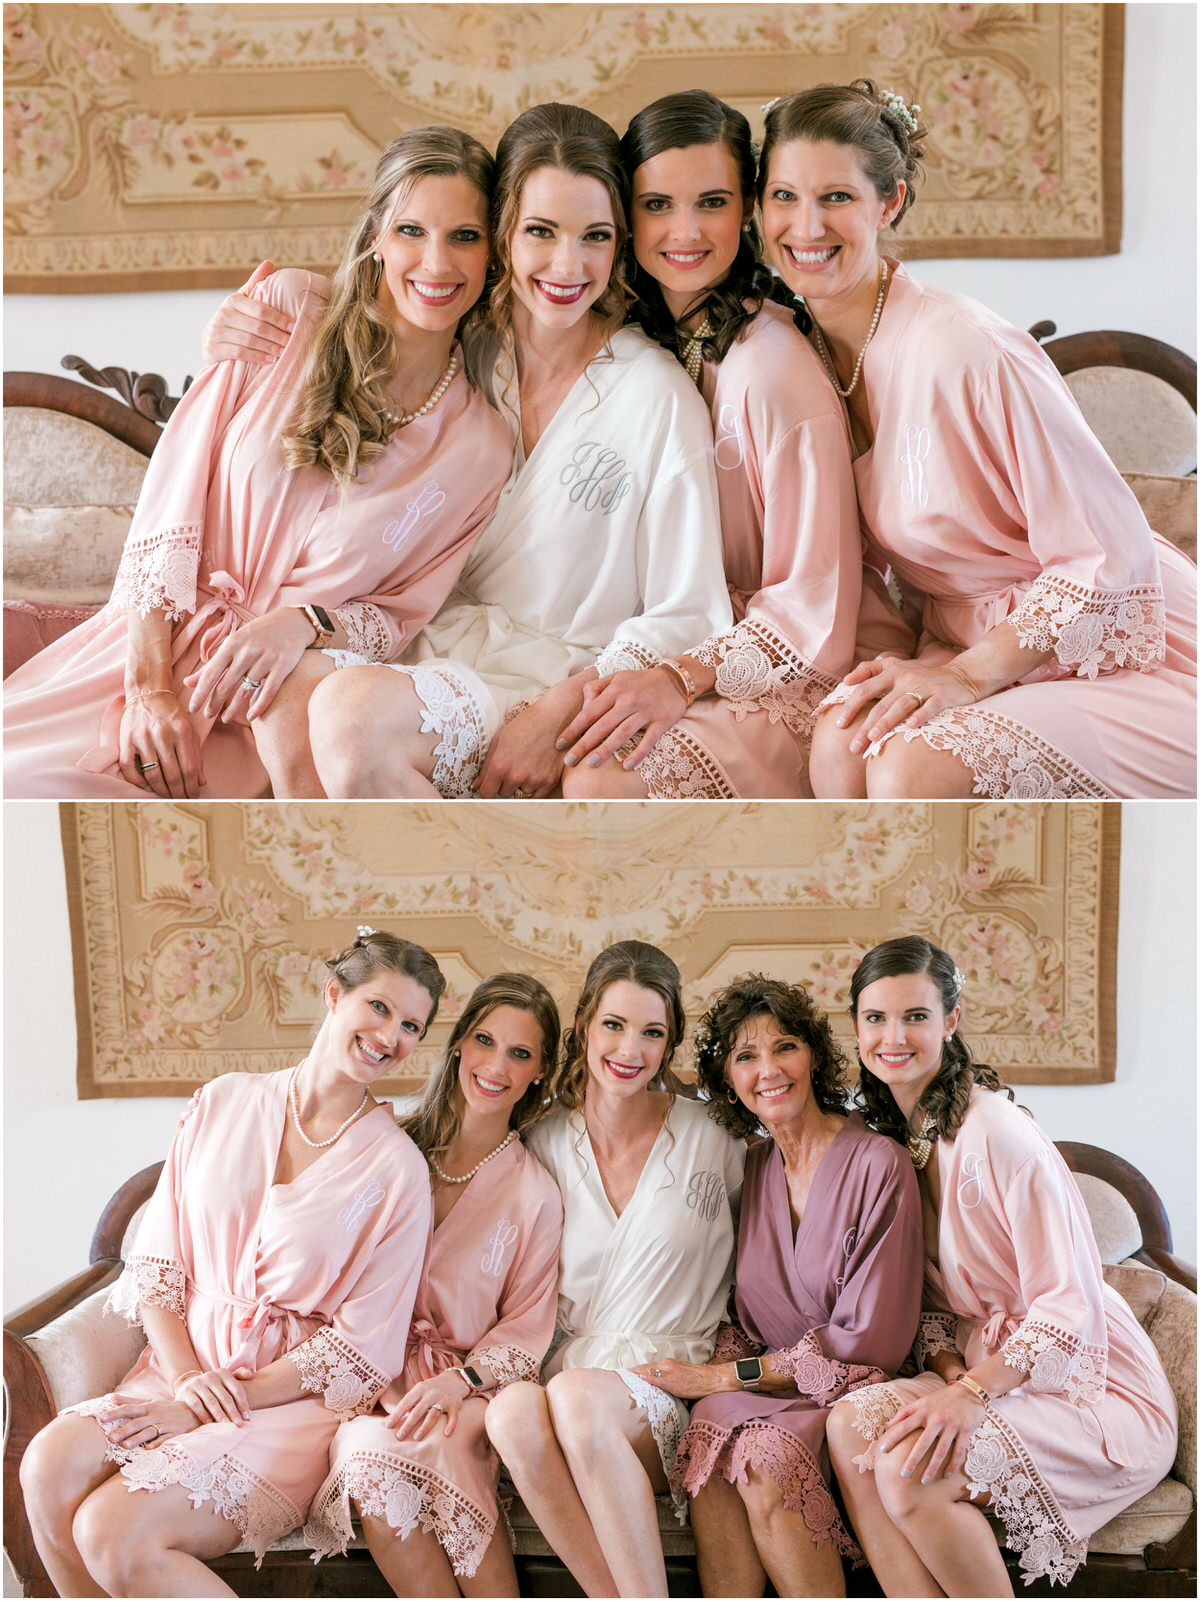 Bride and her bridal party in matching robes